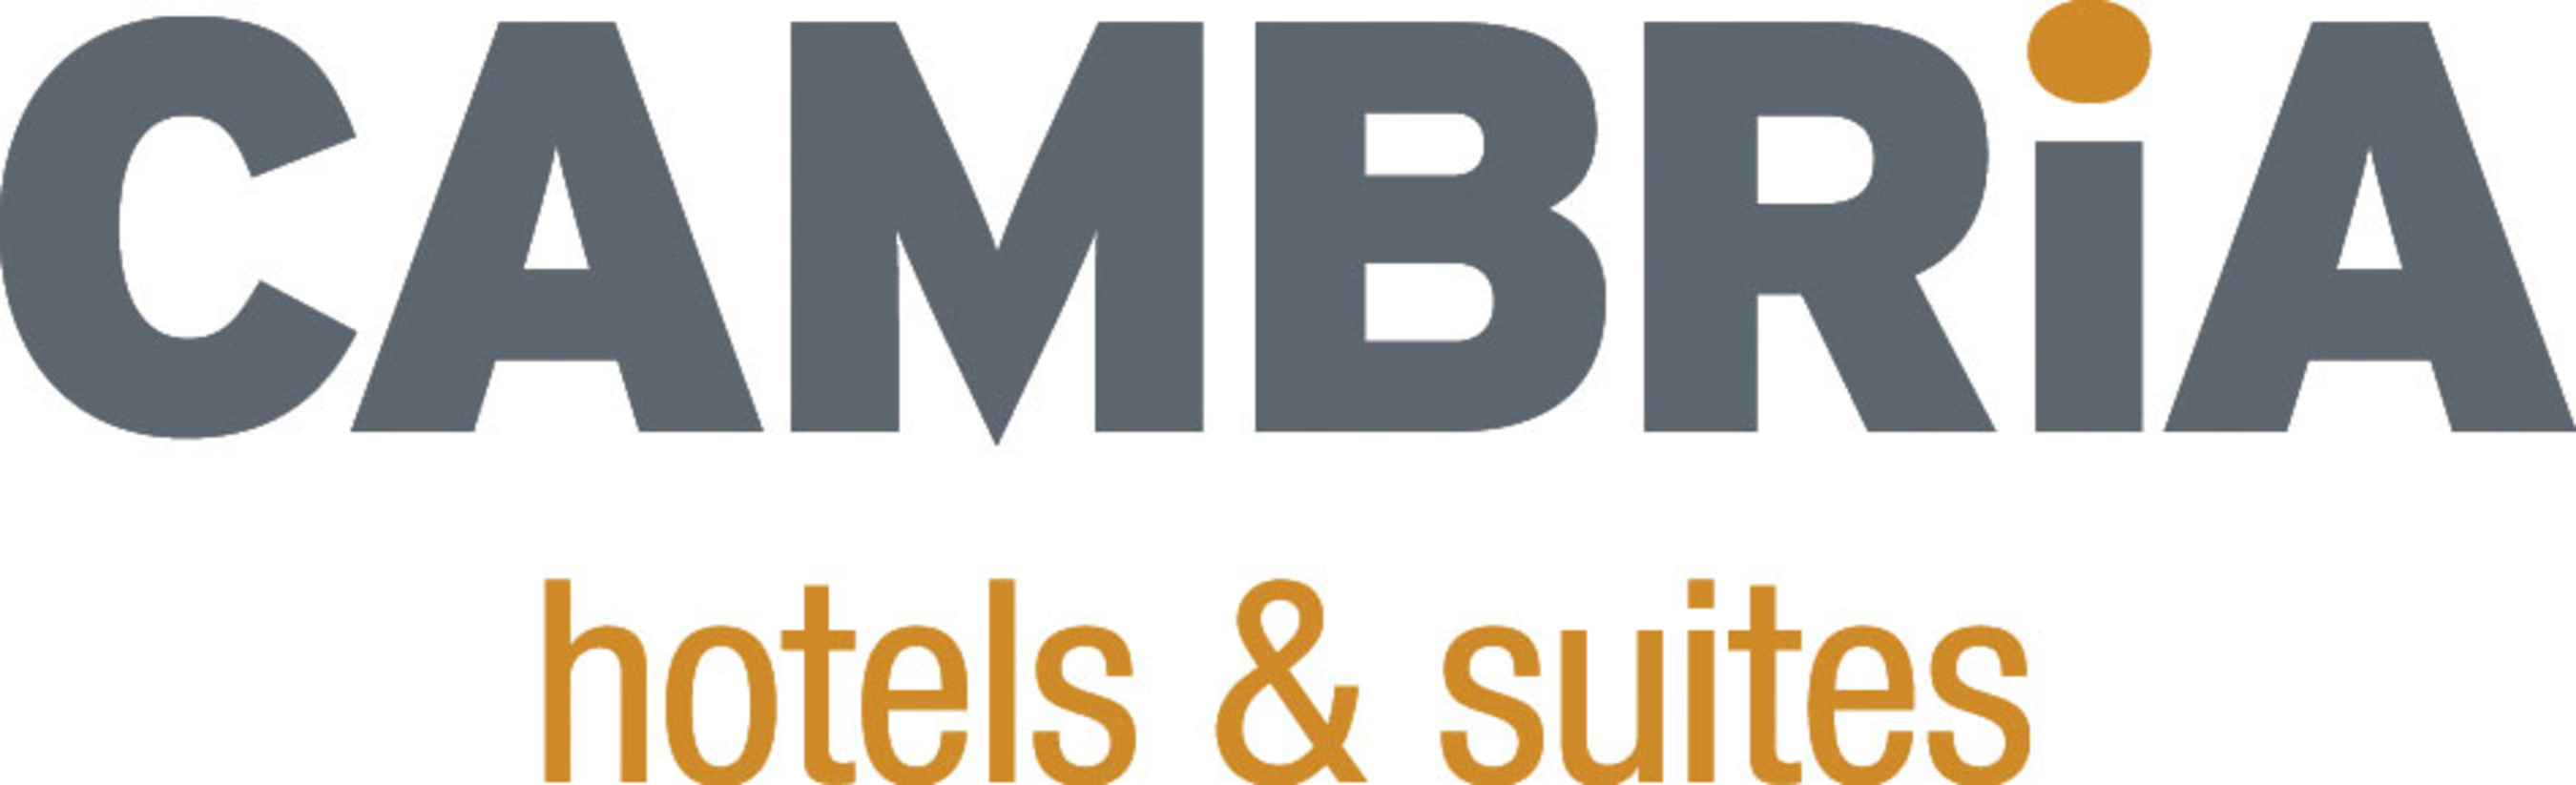 CAMBRIA hotels & suites NEW logo